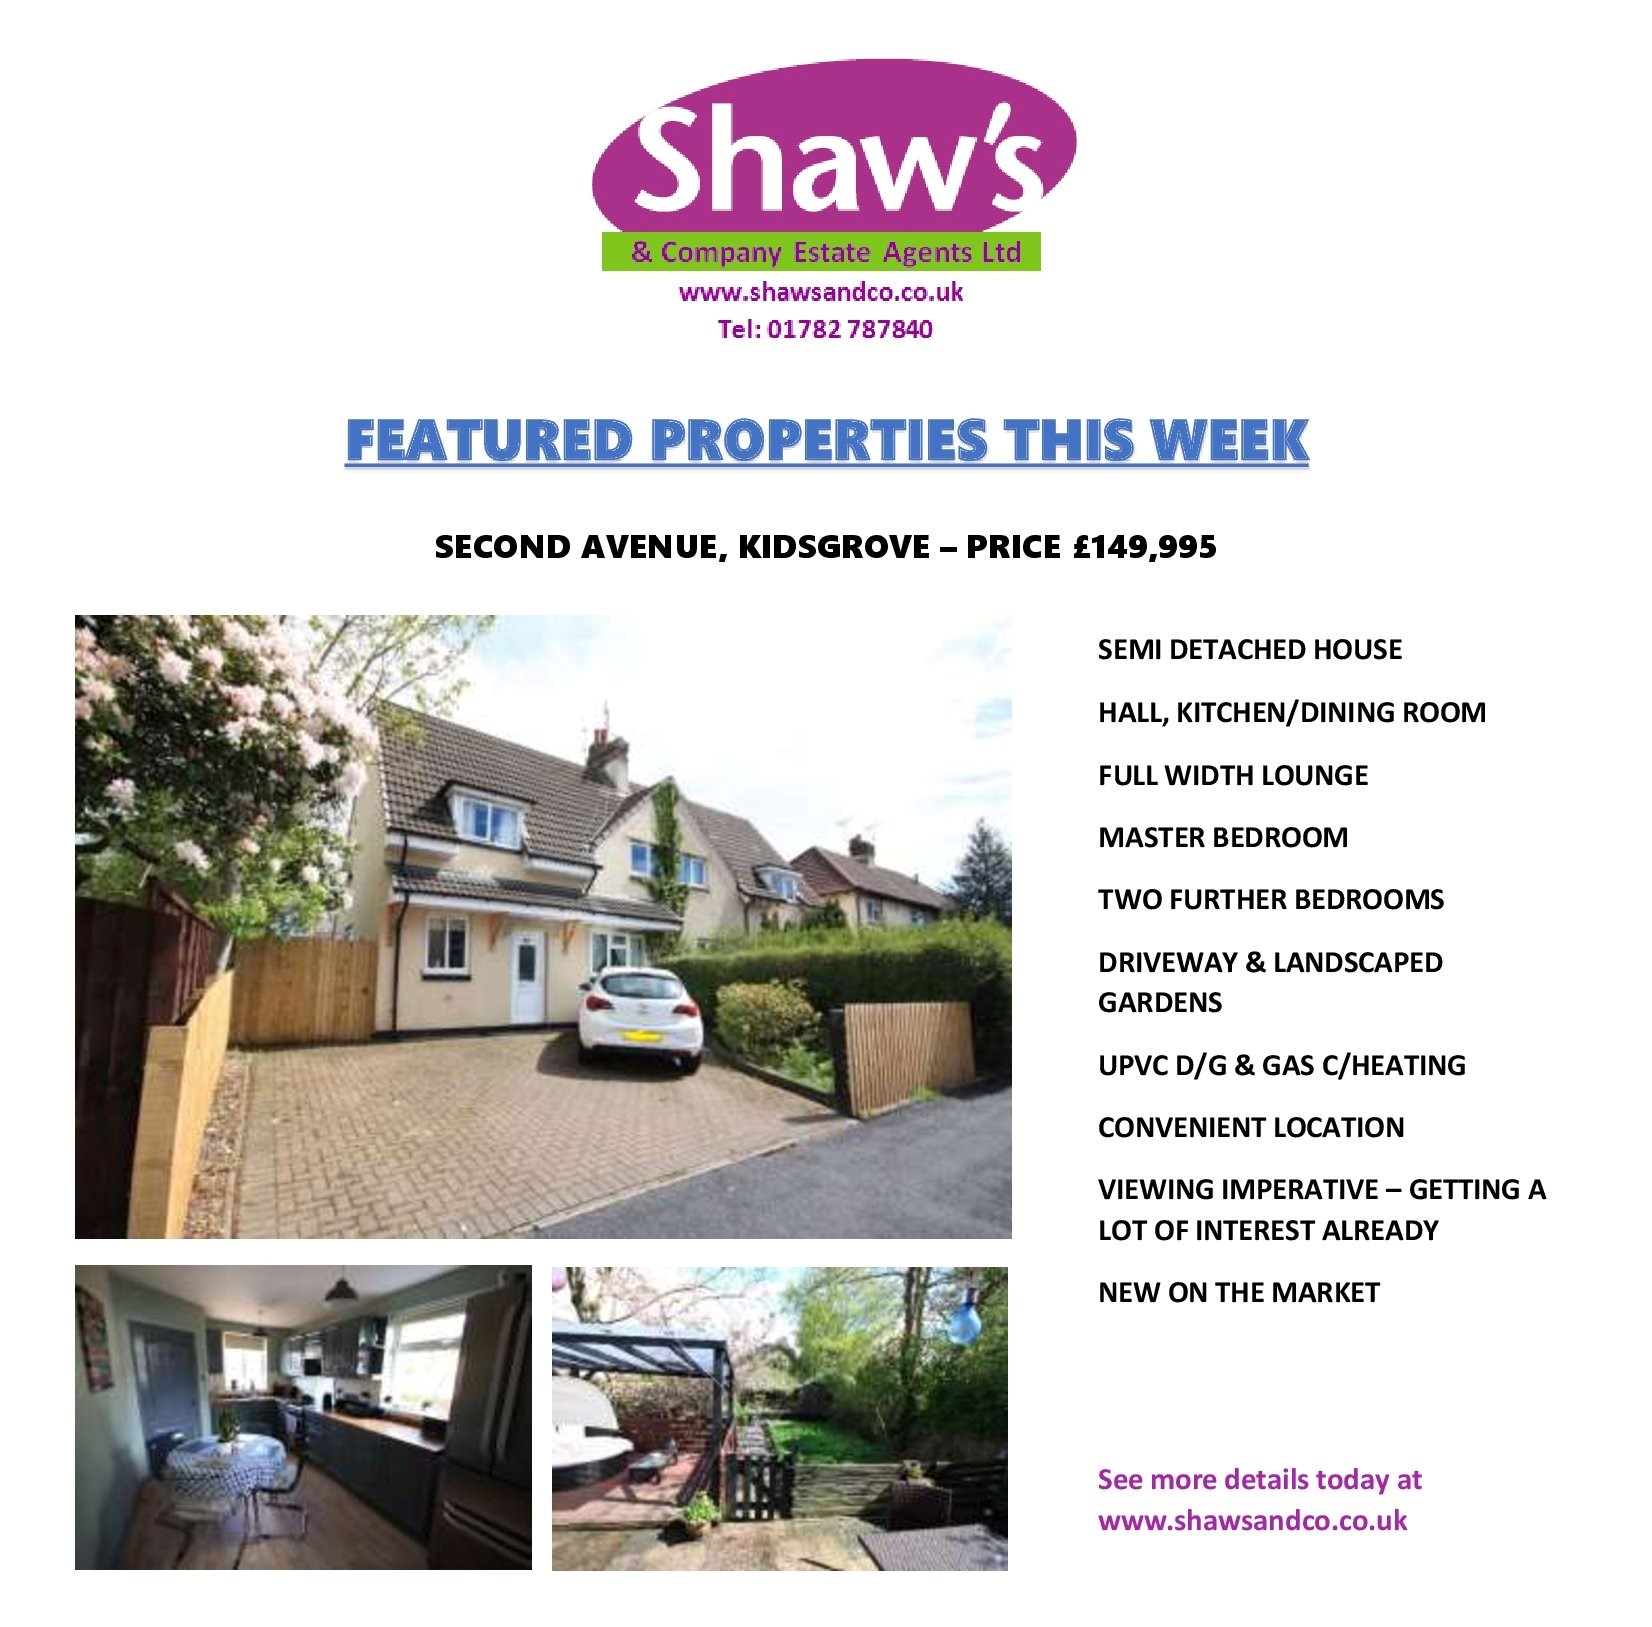 NEW & FEATURED PROPERTIES OF THE WEEK!